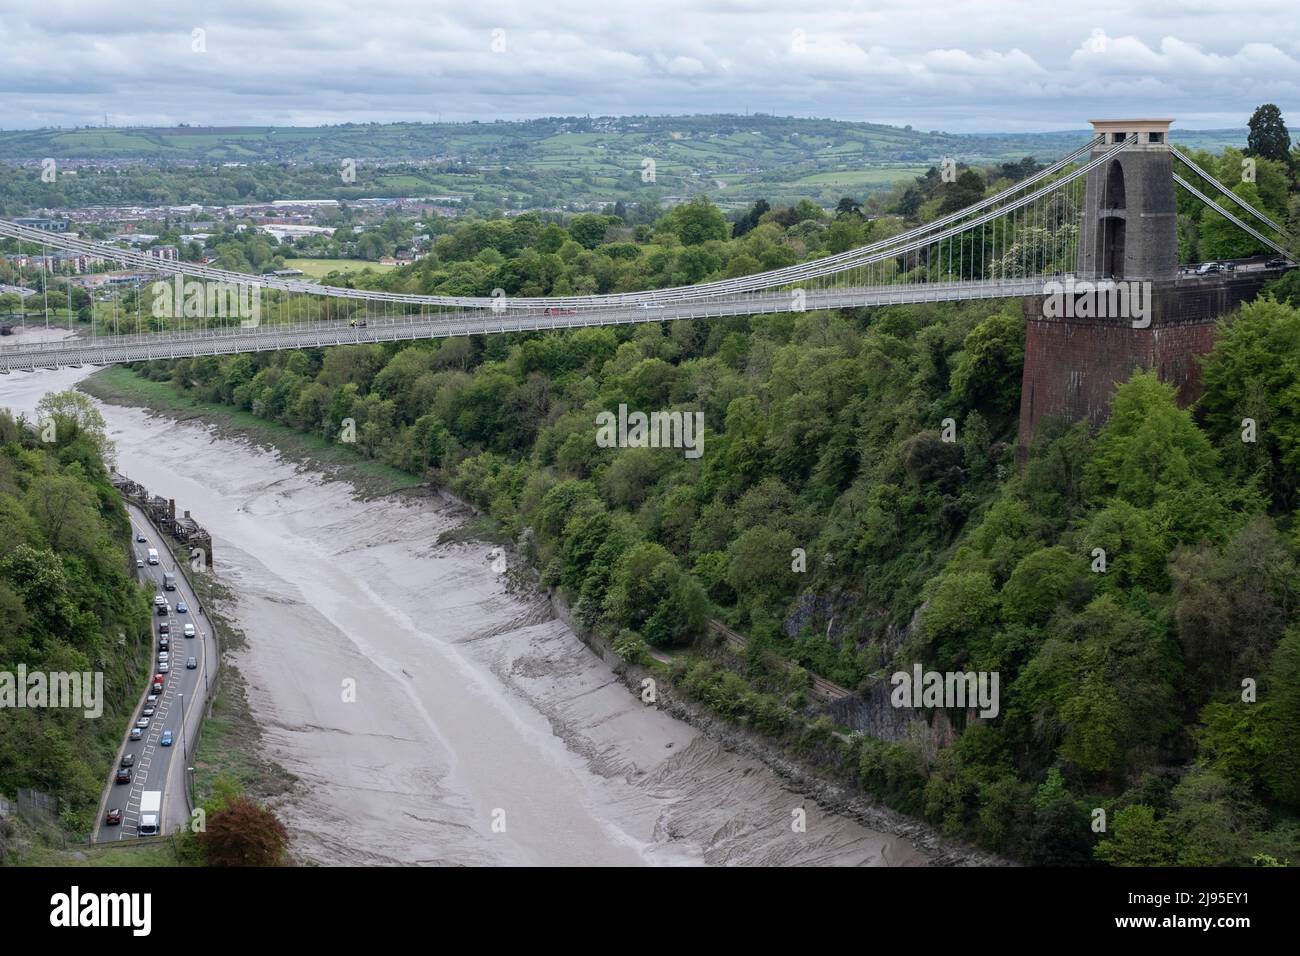 Clifton Suspension Bridge on 6th May 2022 in Bristol, United Kingdom. The Clifton Suspension Bridge is a suspension bridge spanning the Avon Gorge and the River Avon, linking Clifton in Bristol to Leigh Woods in North Somerset. Designed by Isambard Kingdom Brunel, it is a Grade I listed building and forms part of the B3129 road. Stock Photo